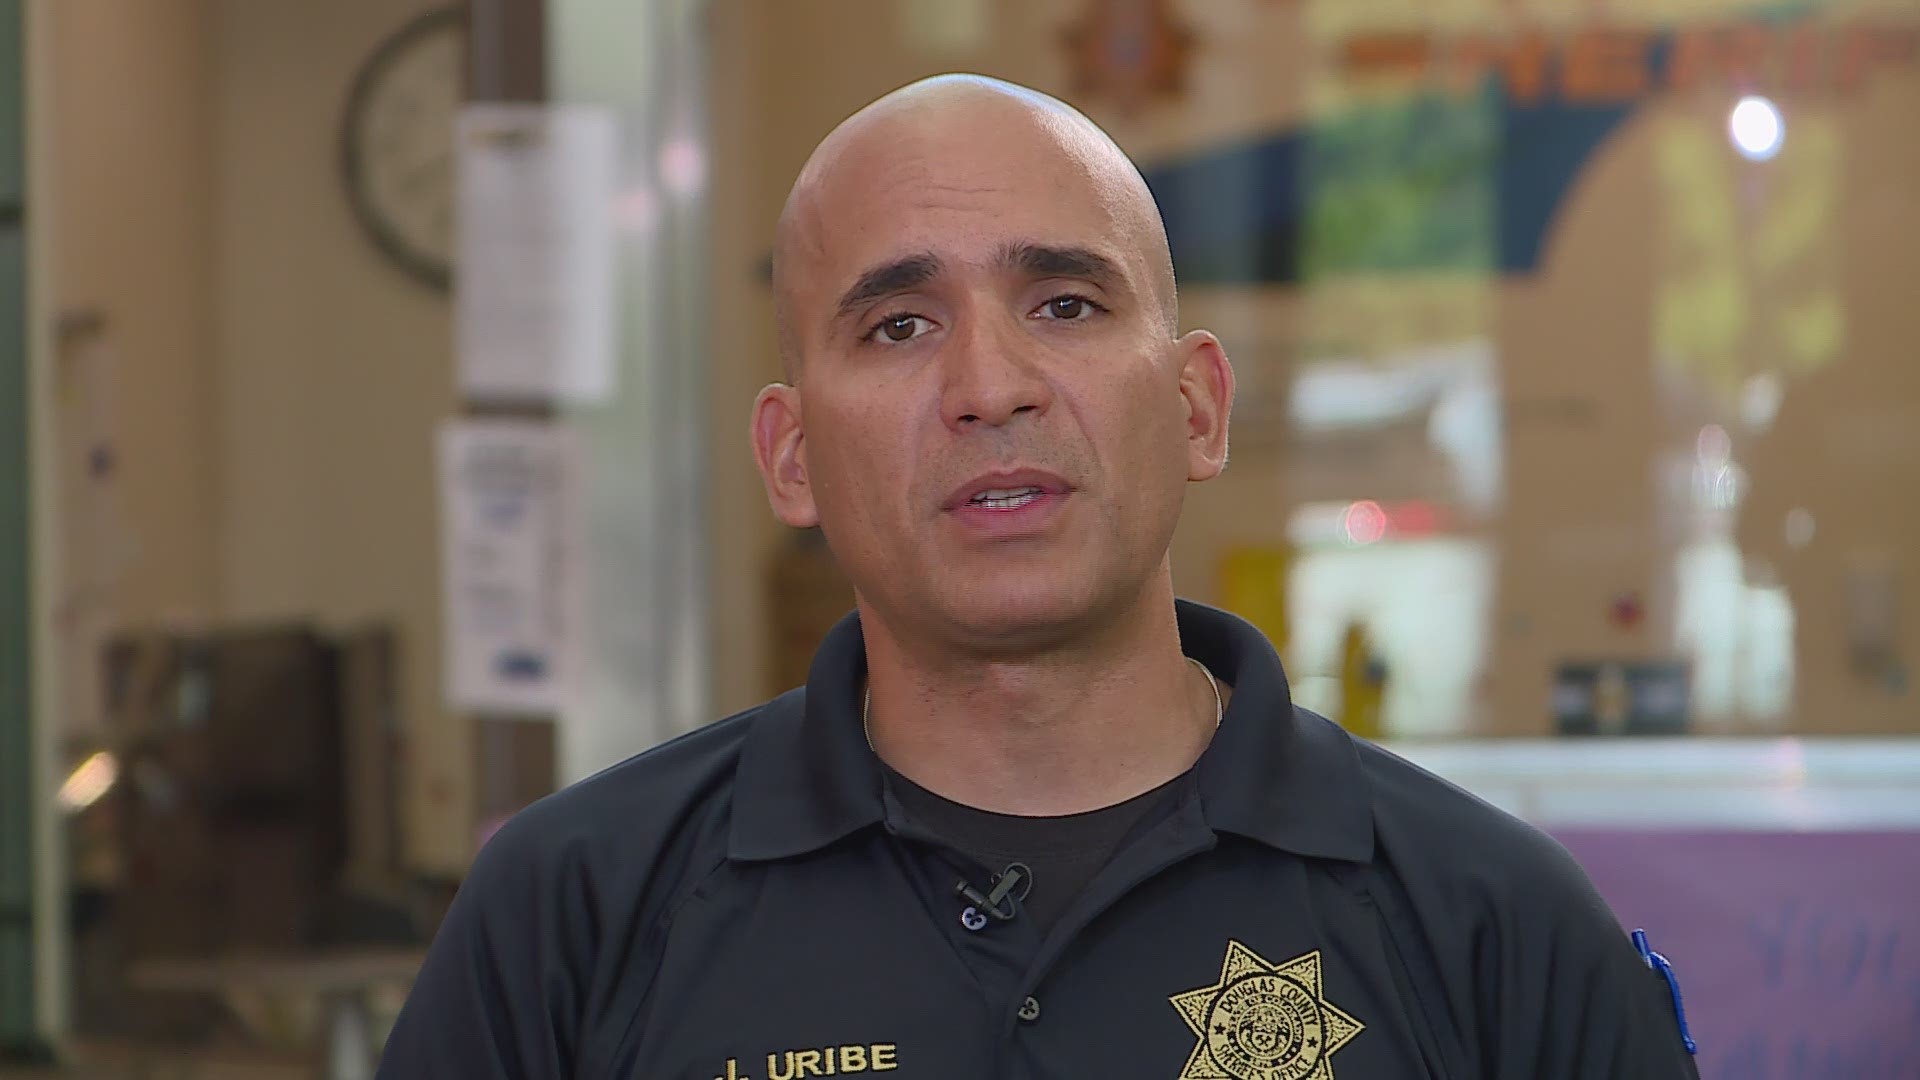 Deputy Uribe is one of 28 SROs who will patrol Douglas County Schools by the end of the school year.